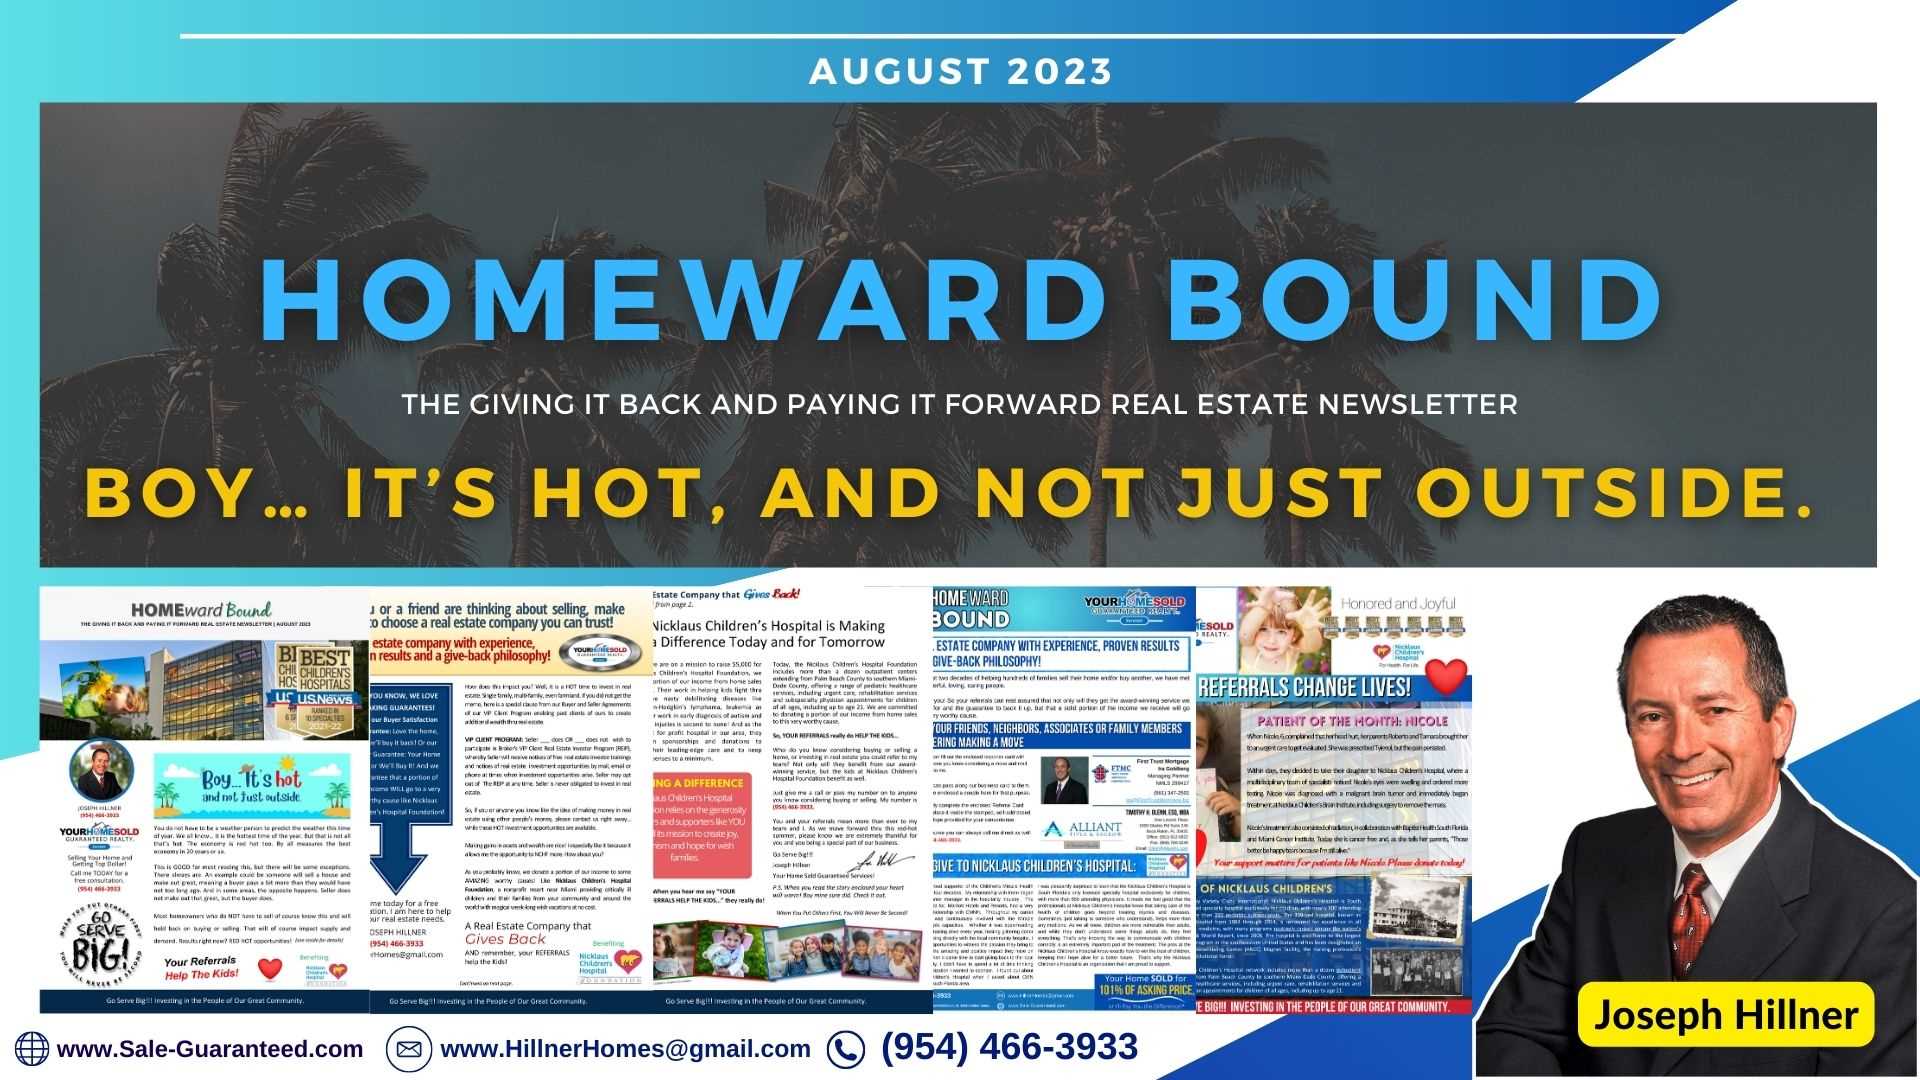 Boy… It’s hot, and not just outside. | August 2023 Homeward Bound Newsletter